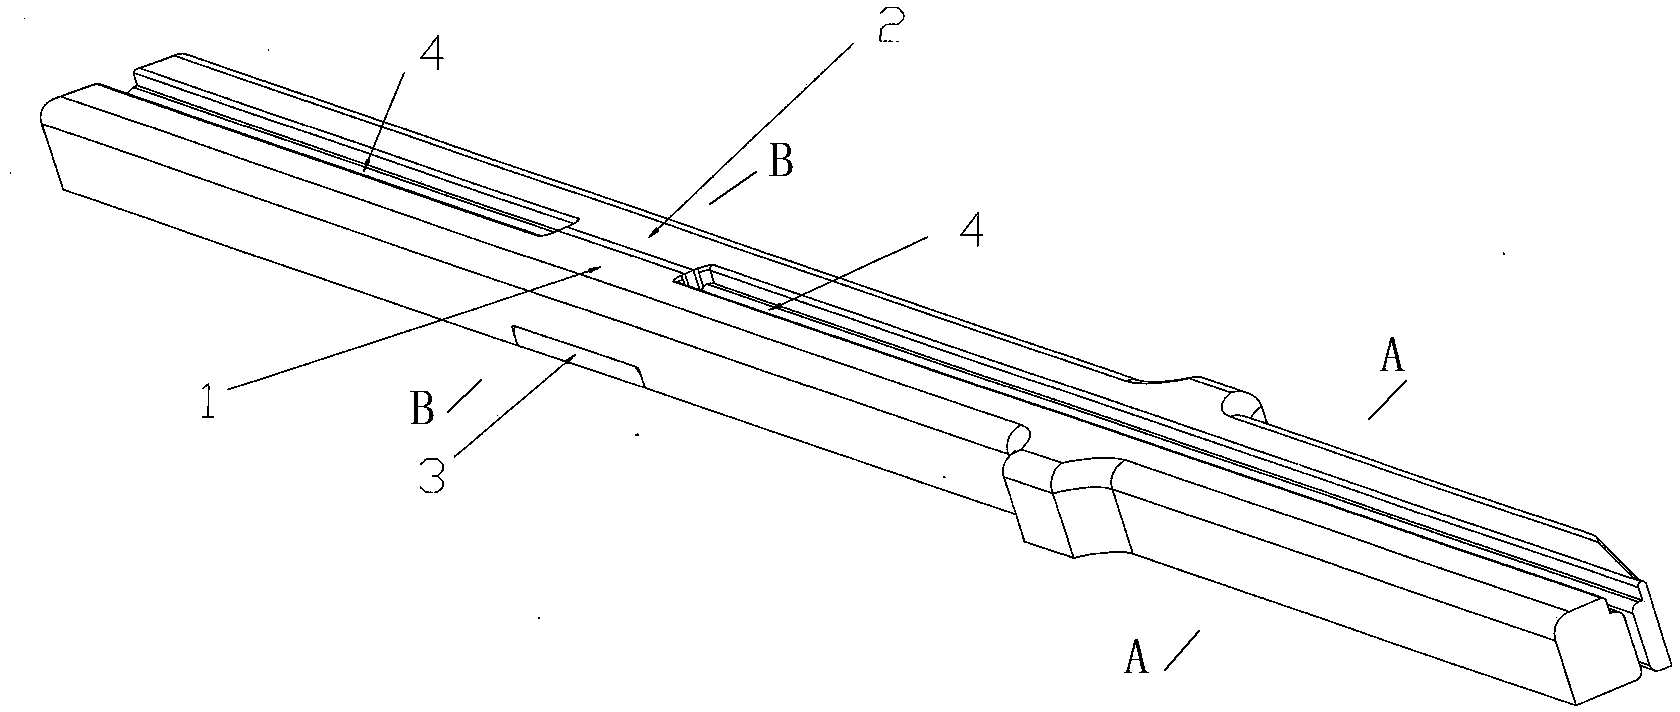 Forming tool and method for I-shaped stringers with openings